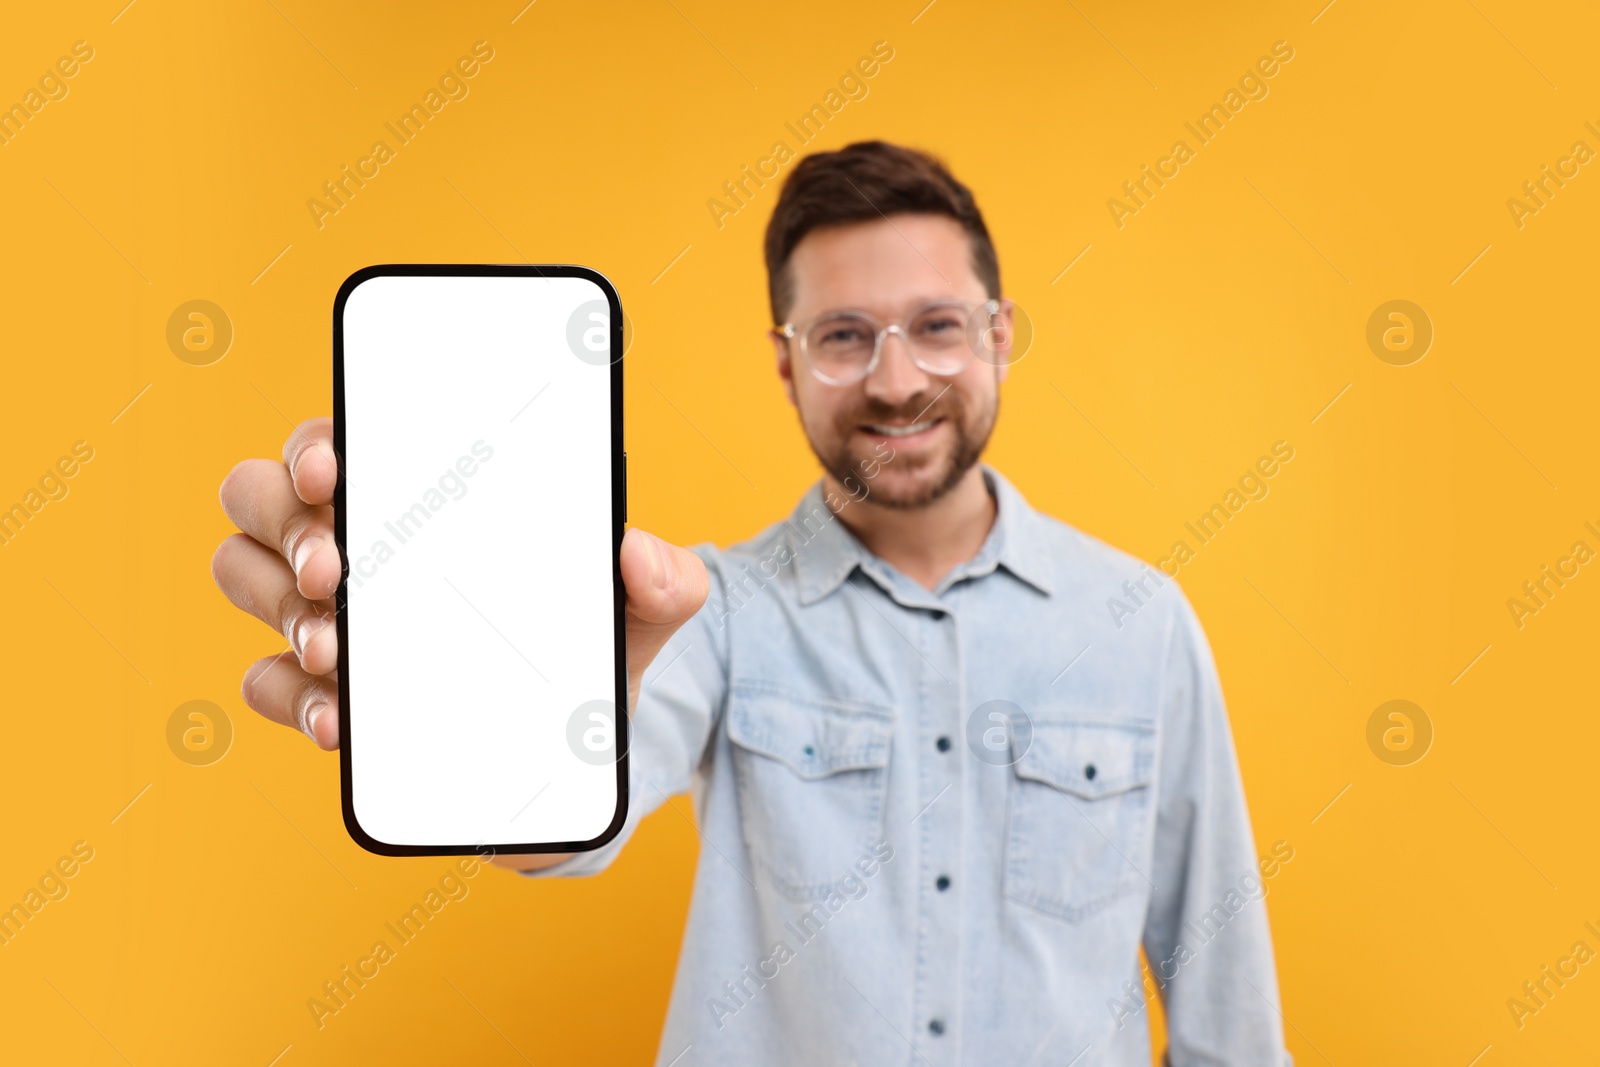 Photo of Handsome man showing smartphone in hand on yellow background, selective focus. Mockup for design